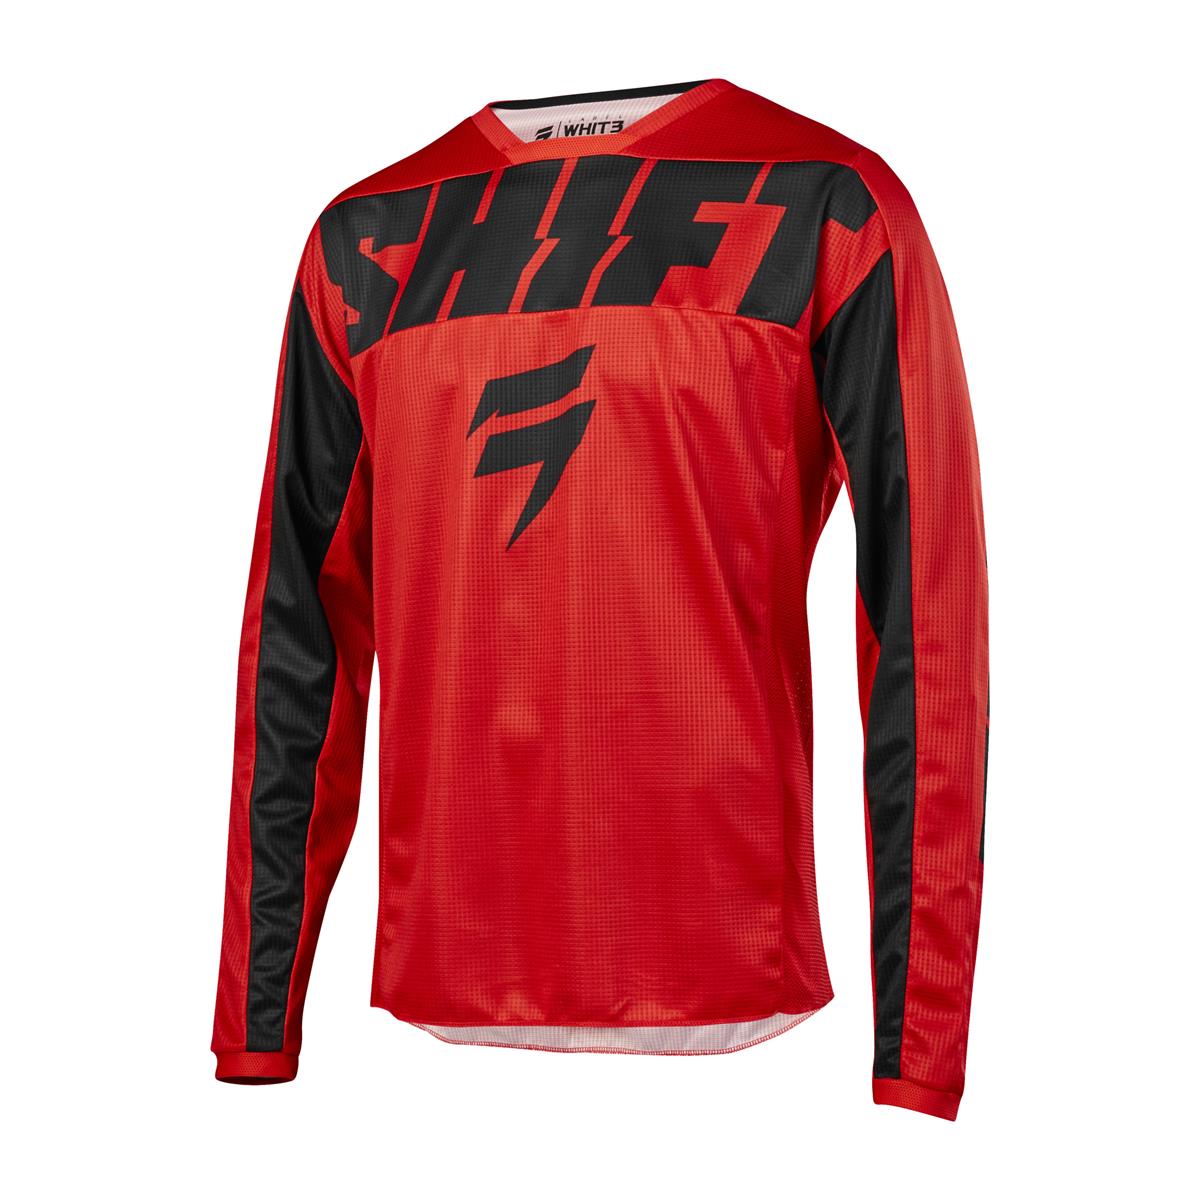 Shift Kids Jersey Whit3 Label York Red